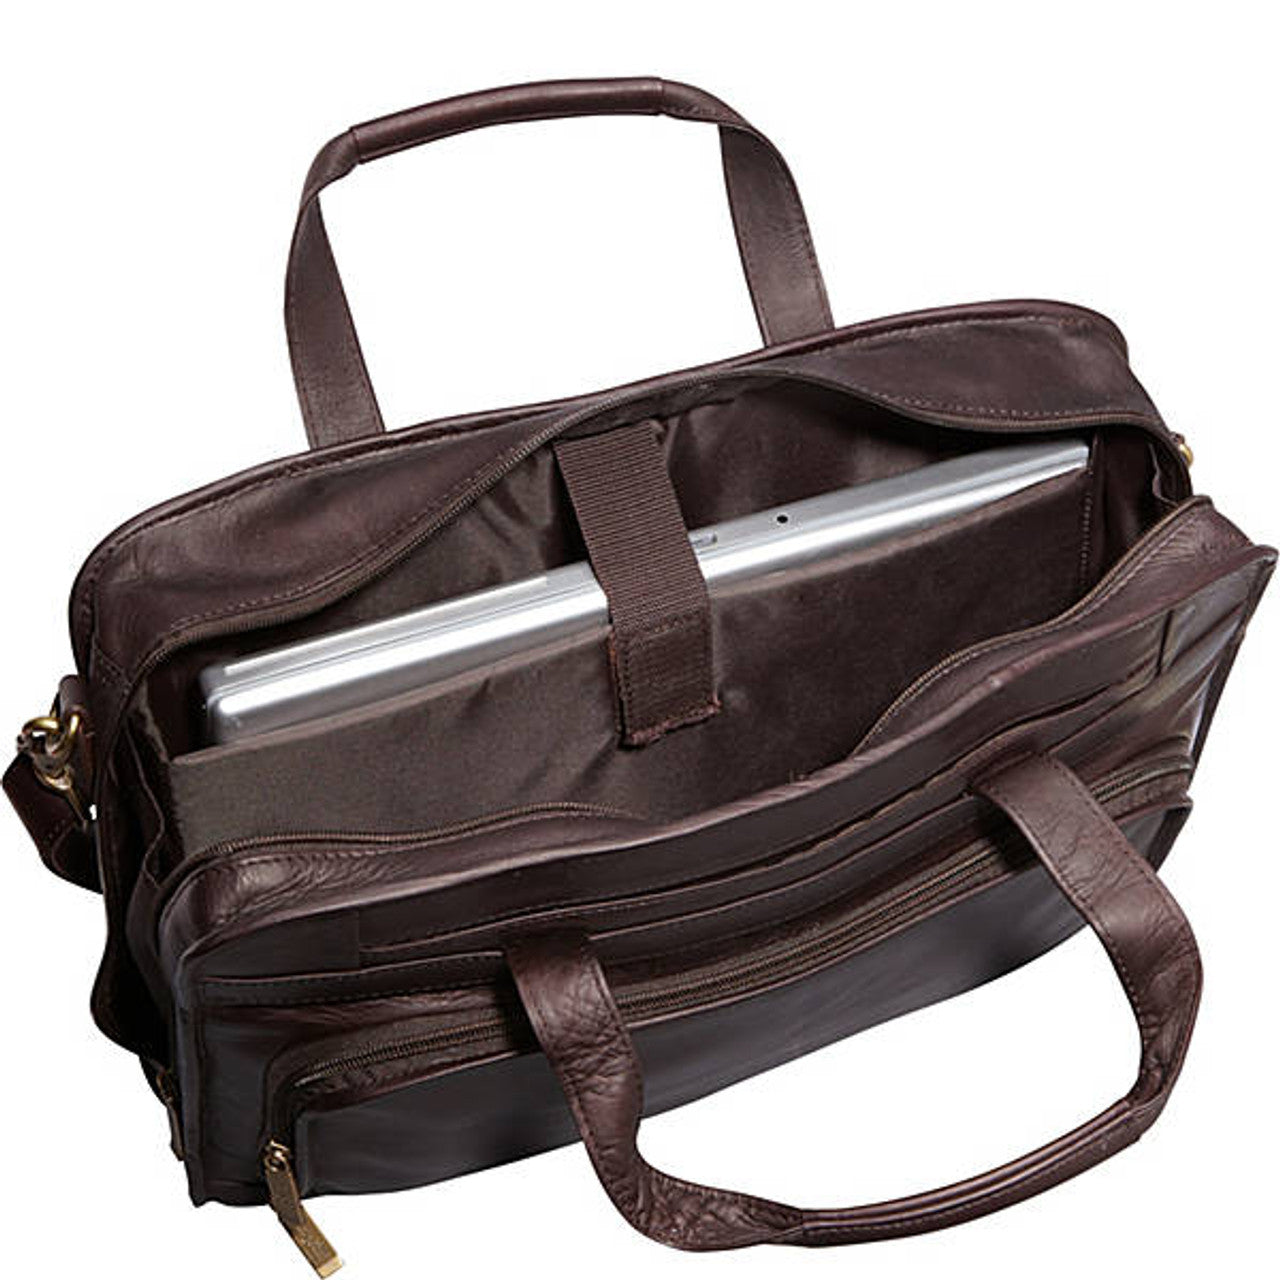 Professional Leather Laptop Briefcase - Leather Loom